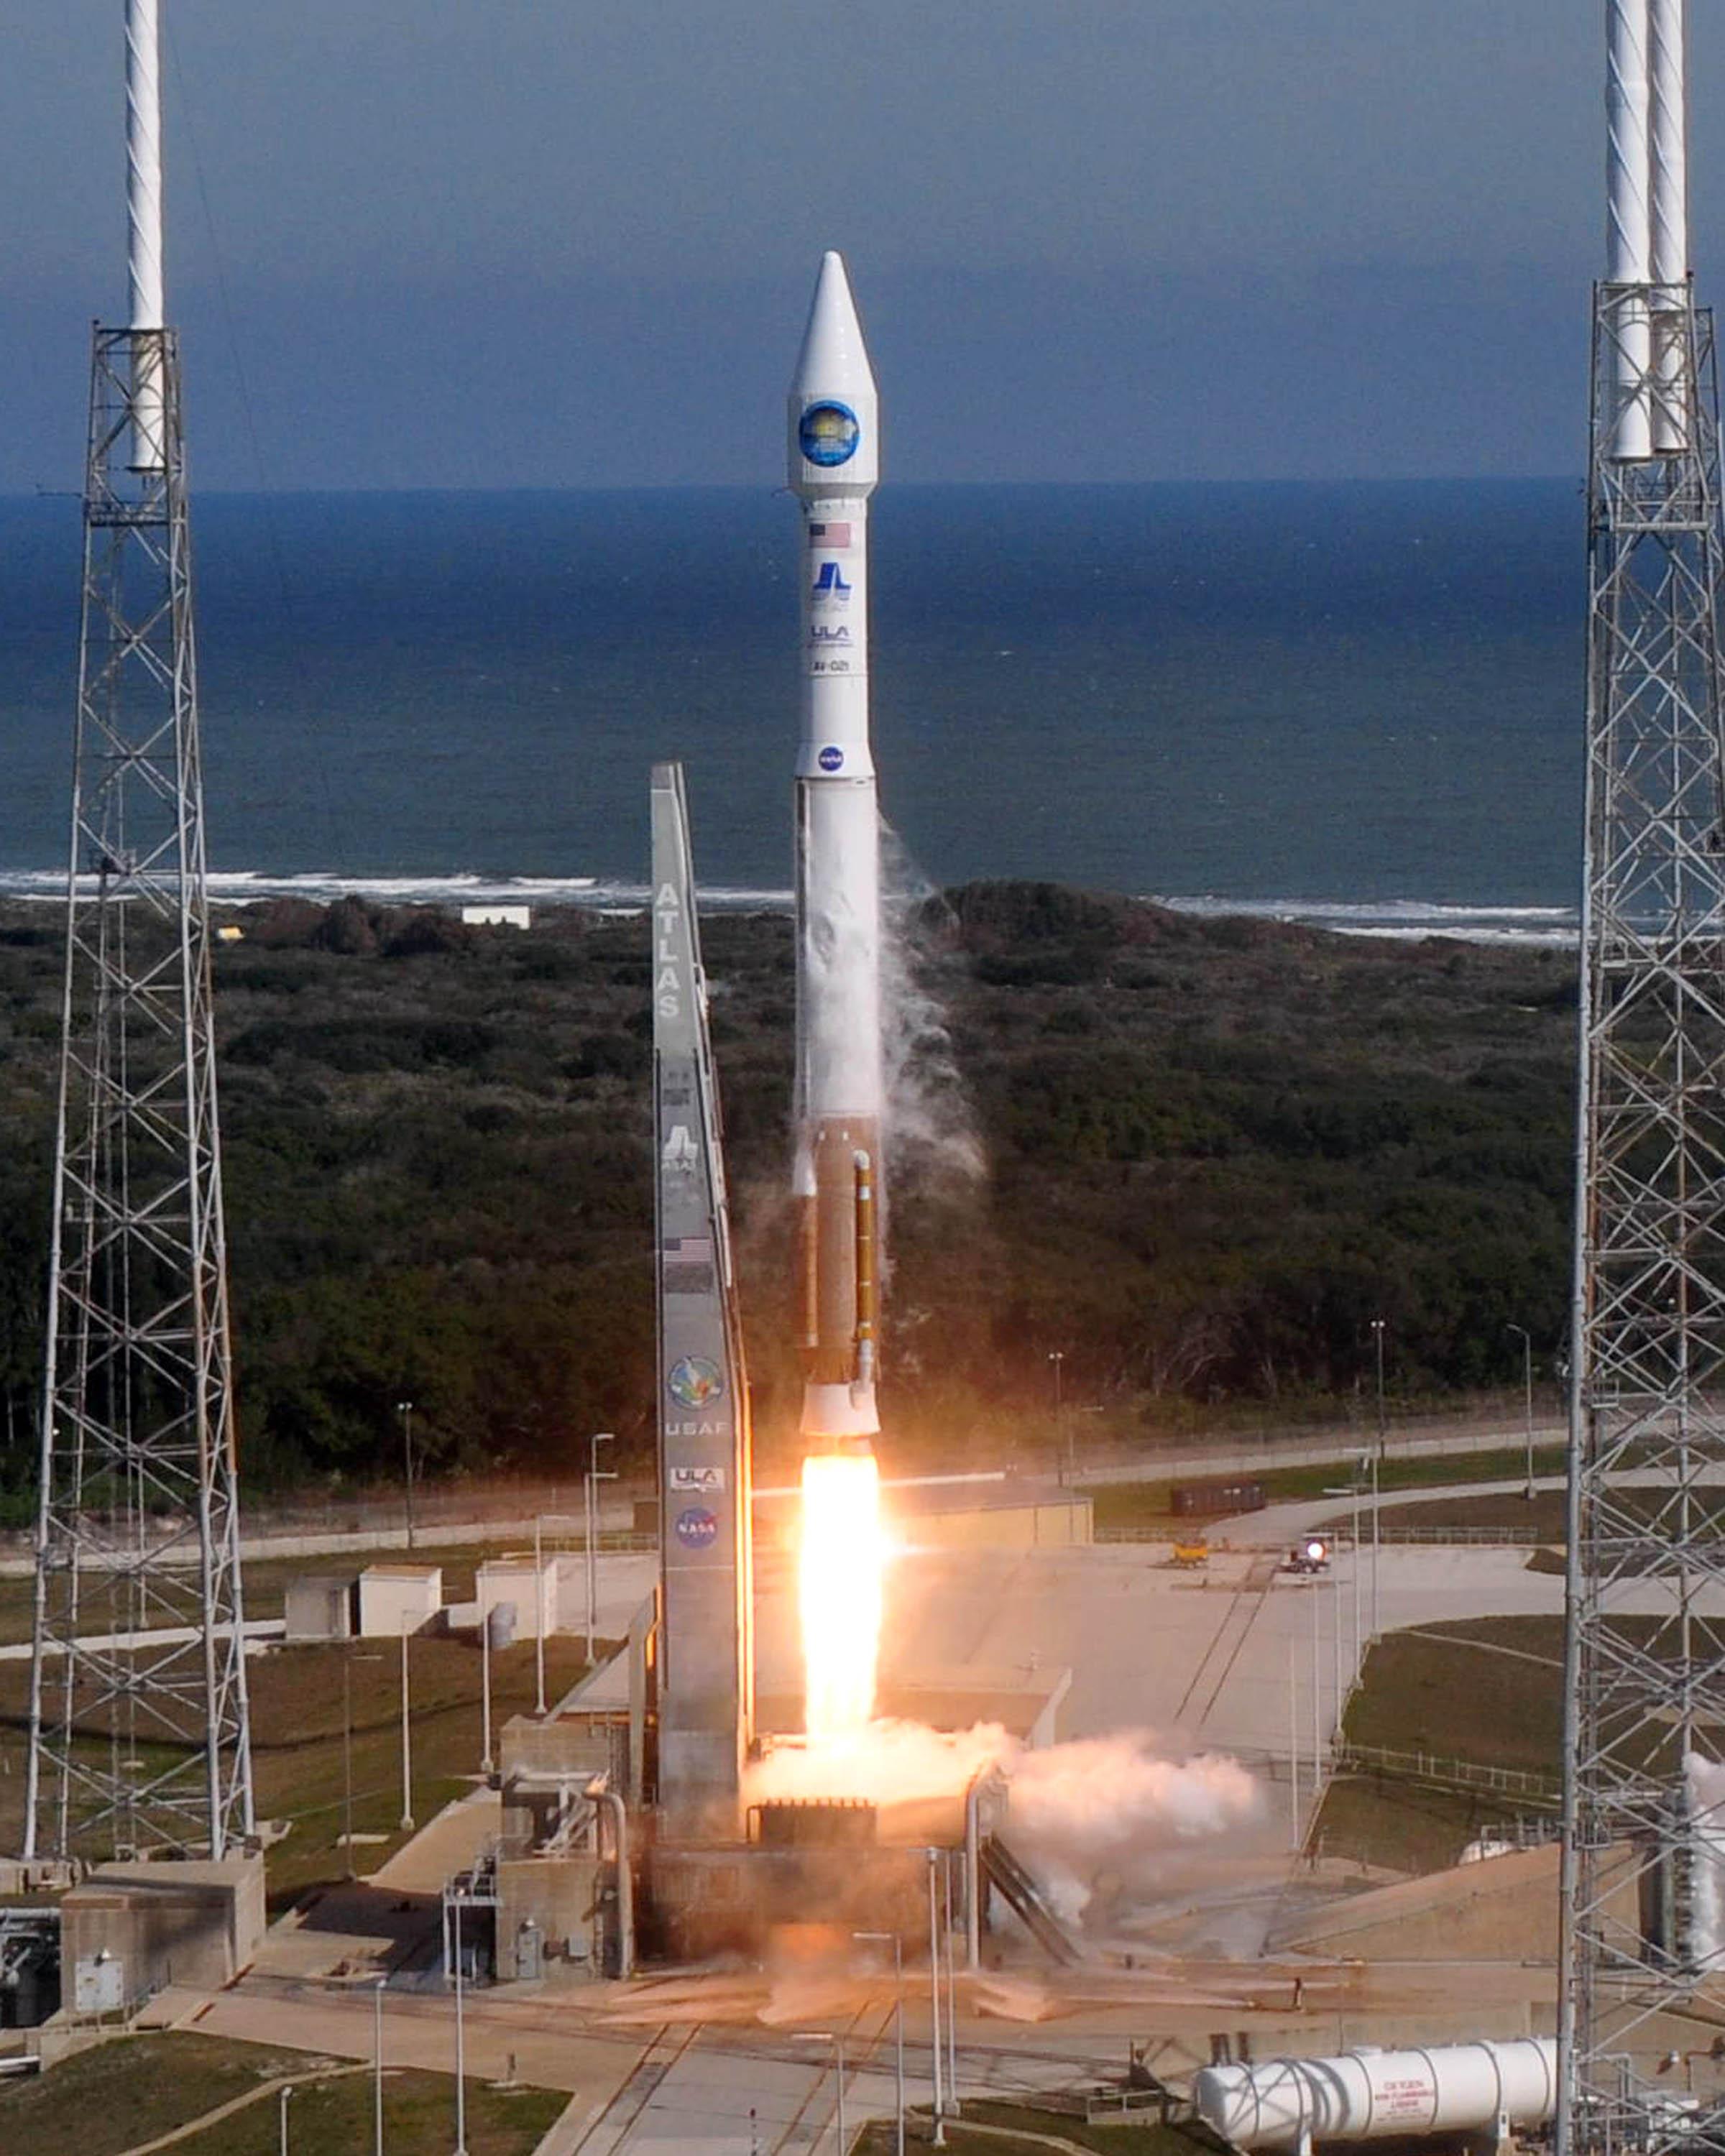 NASA's Solar Dynamics Observatory, SDO, launched aboard a United Launch Alliance Atlas V from Space Launch Complex-41 at 10:23 a.m. EST on Thursday, Feb. 11, 2010.